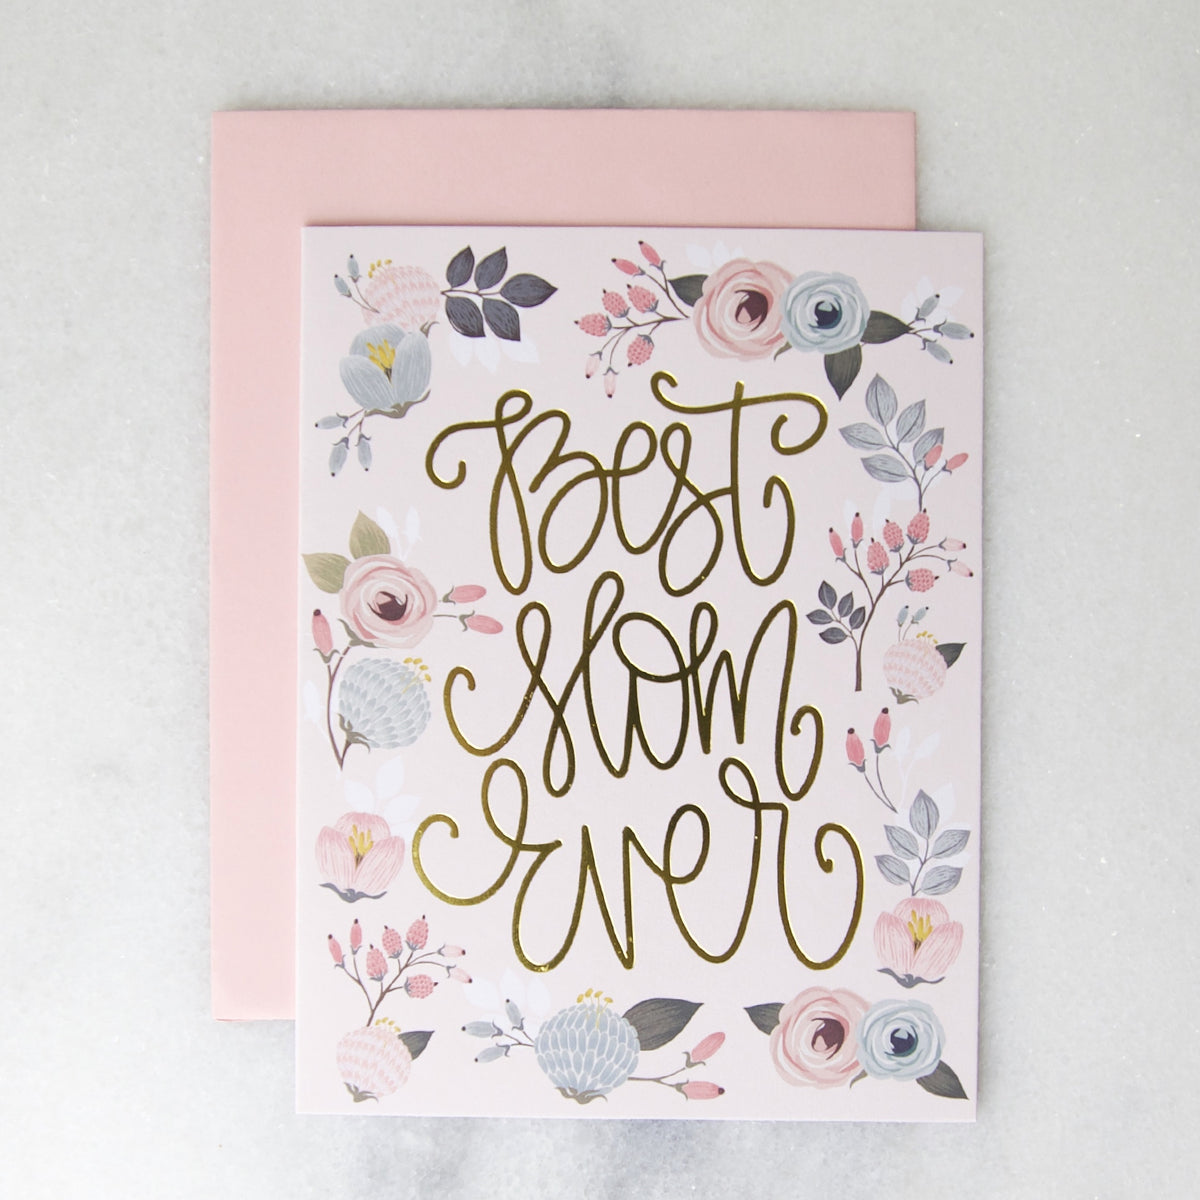 GREETING CARD "BEST MOM EVER"